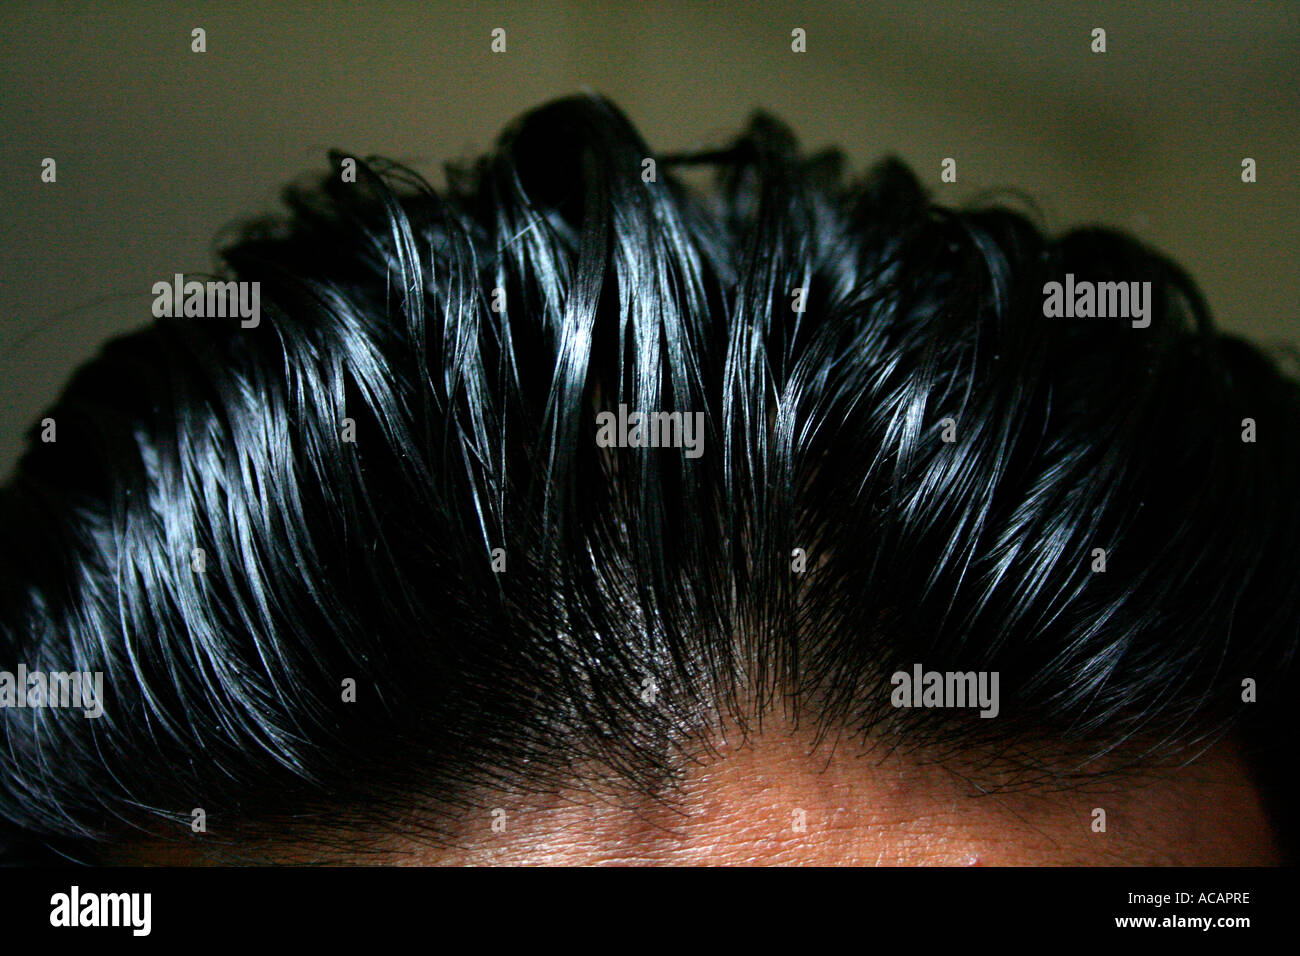 Hairstyle front on view detail Stock Photo